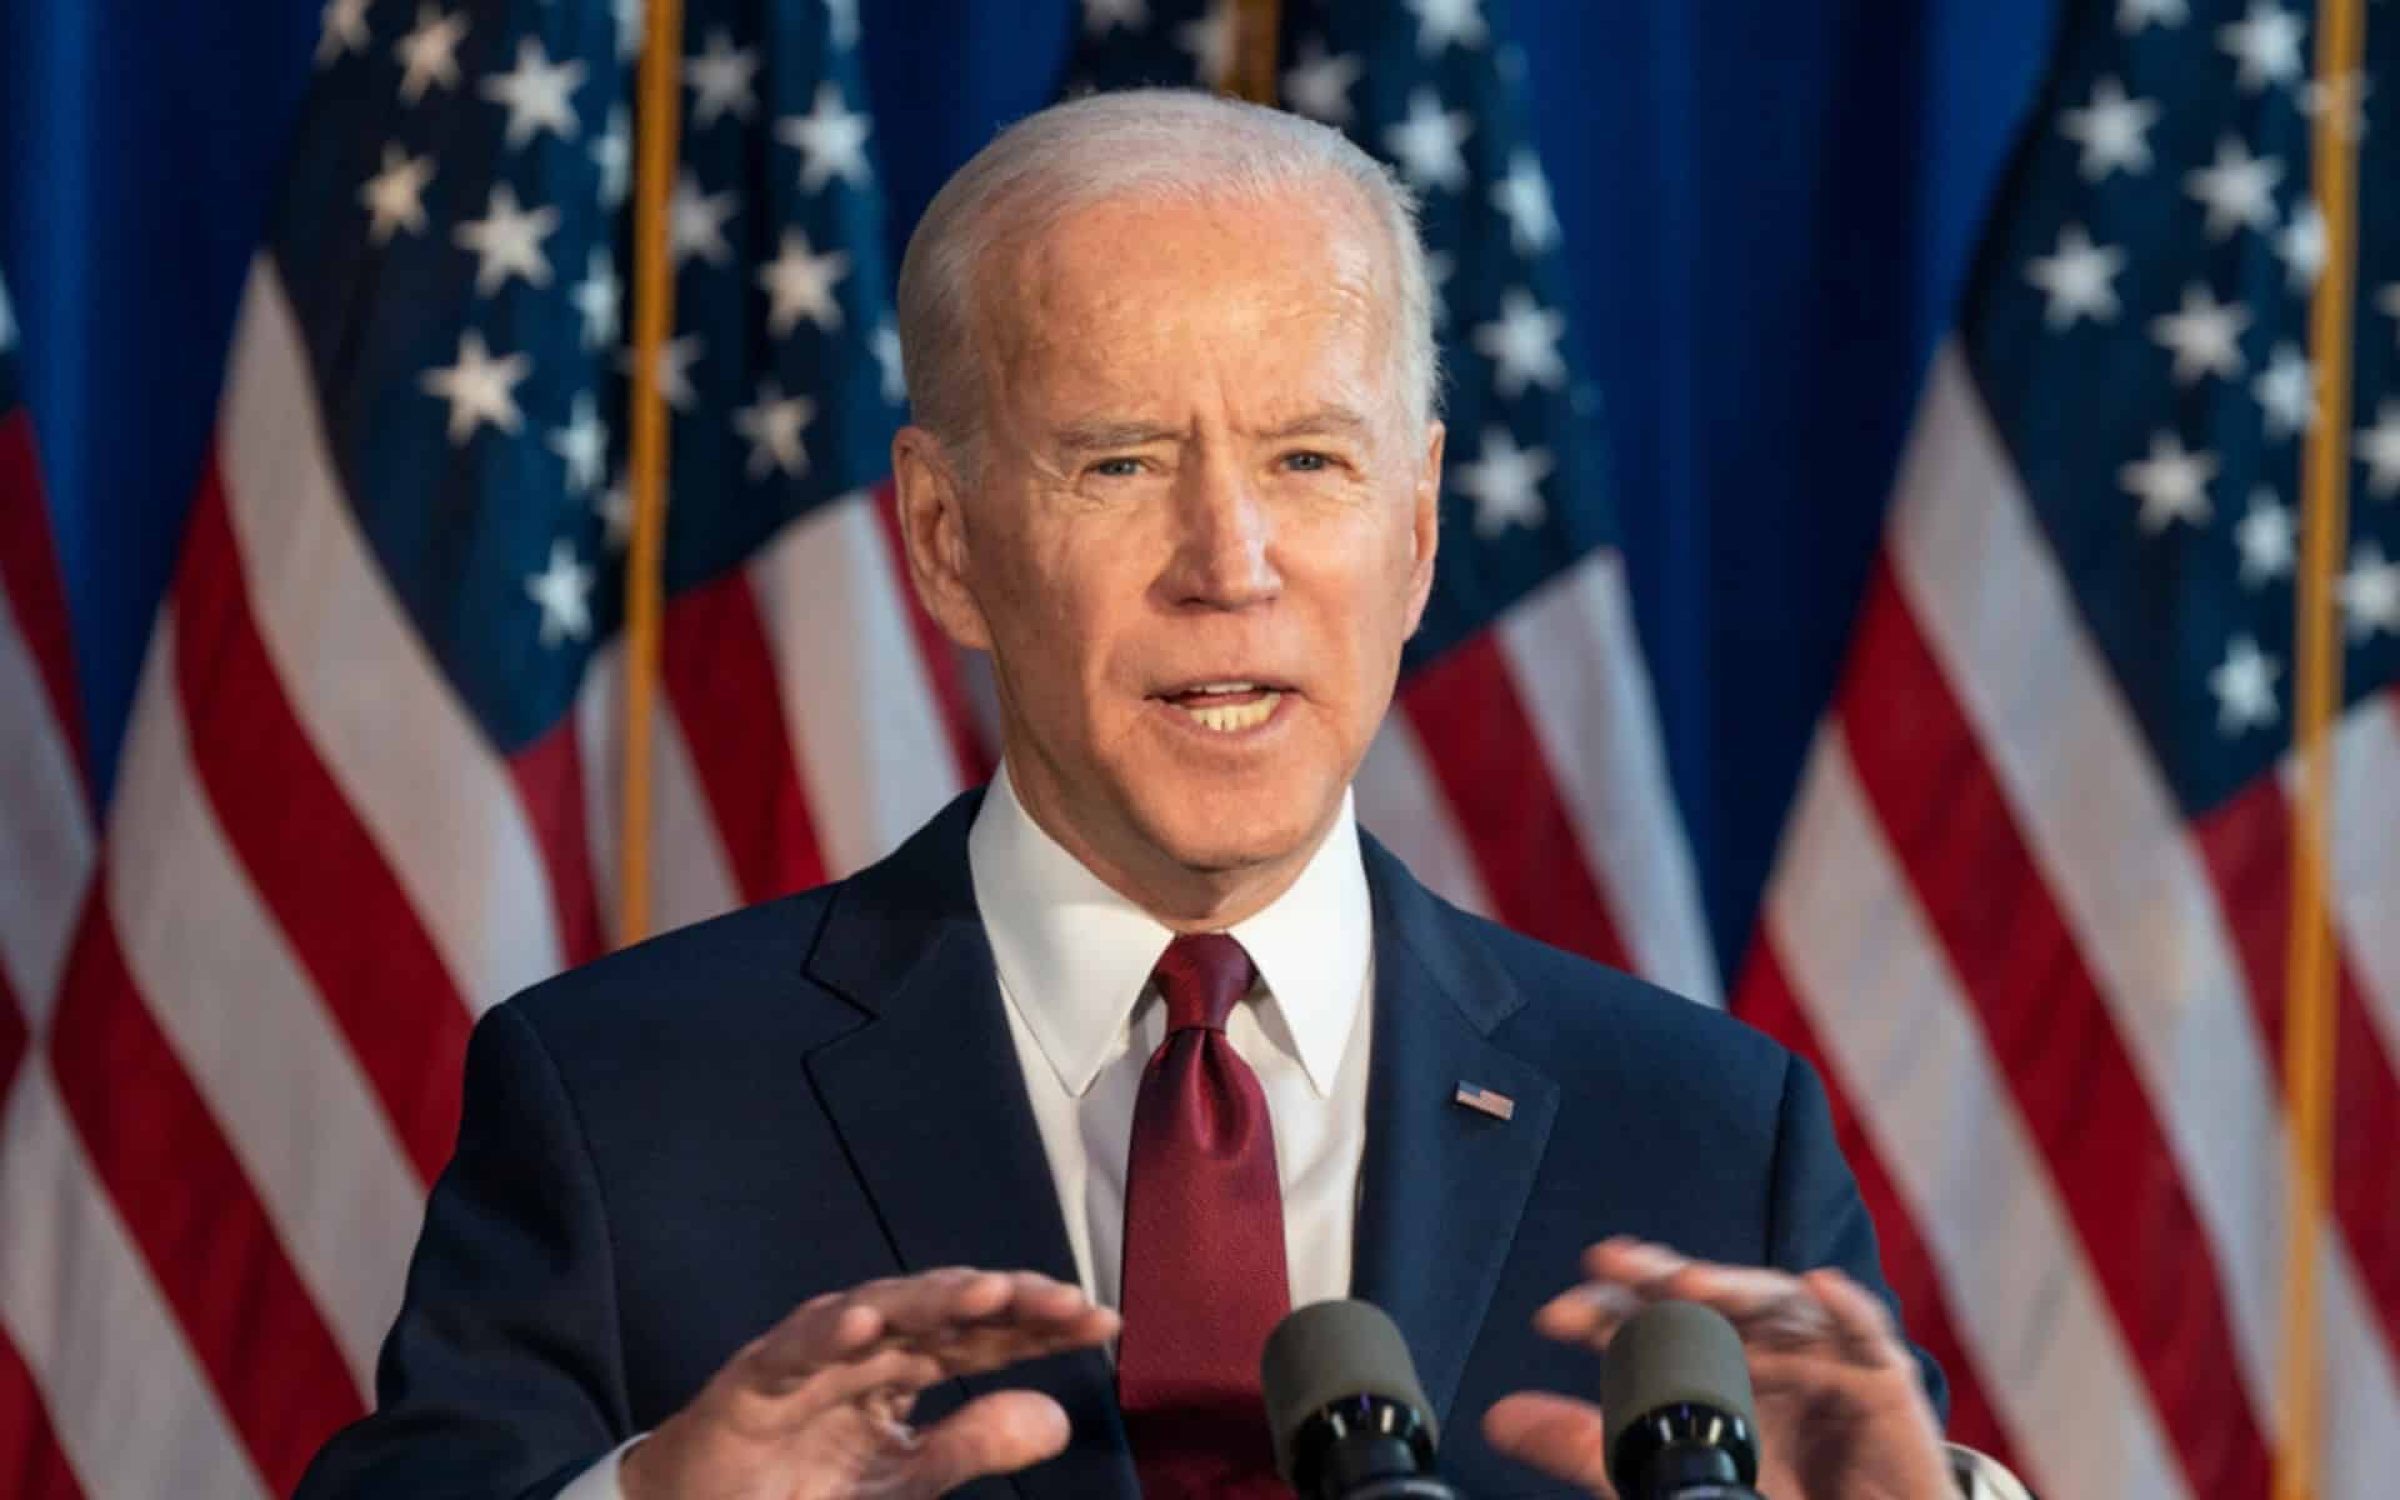 New York, NY - January 7, 2020: Former Vice President & Democratic hopeful Joe Biden made foreign policy statement at Current on Pier 59